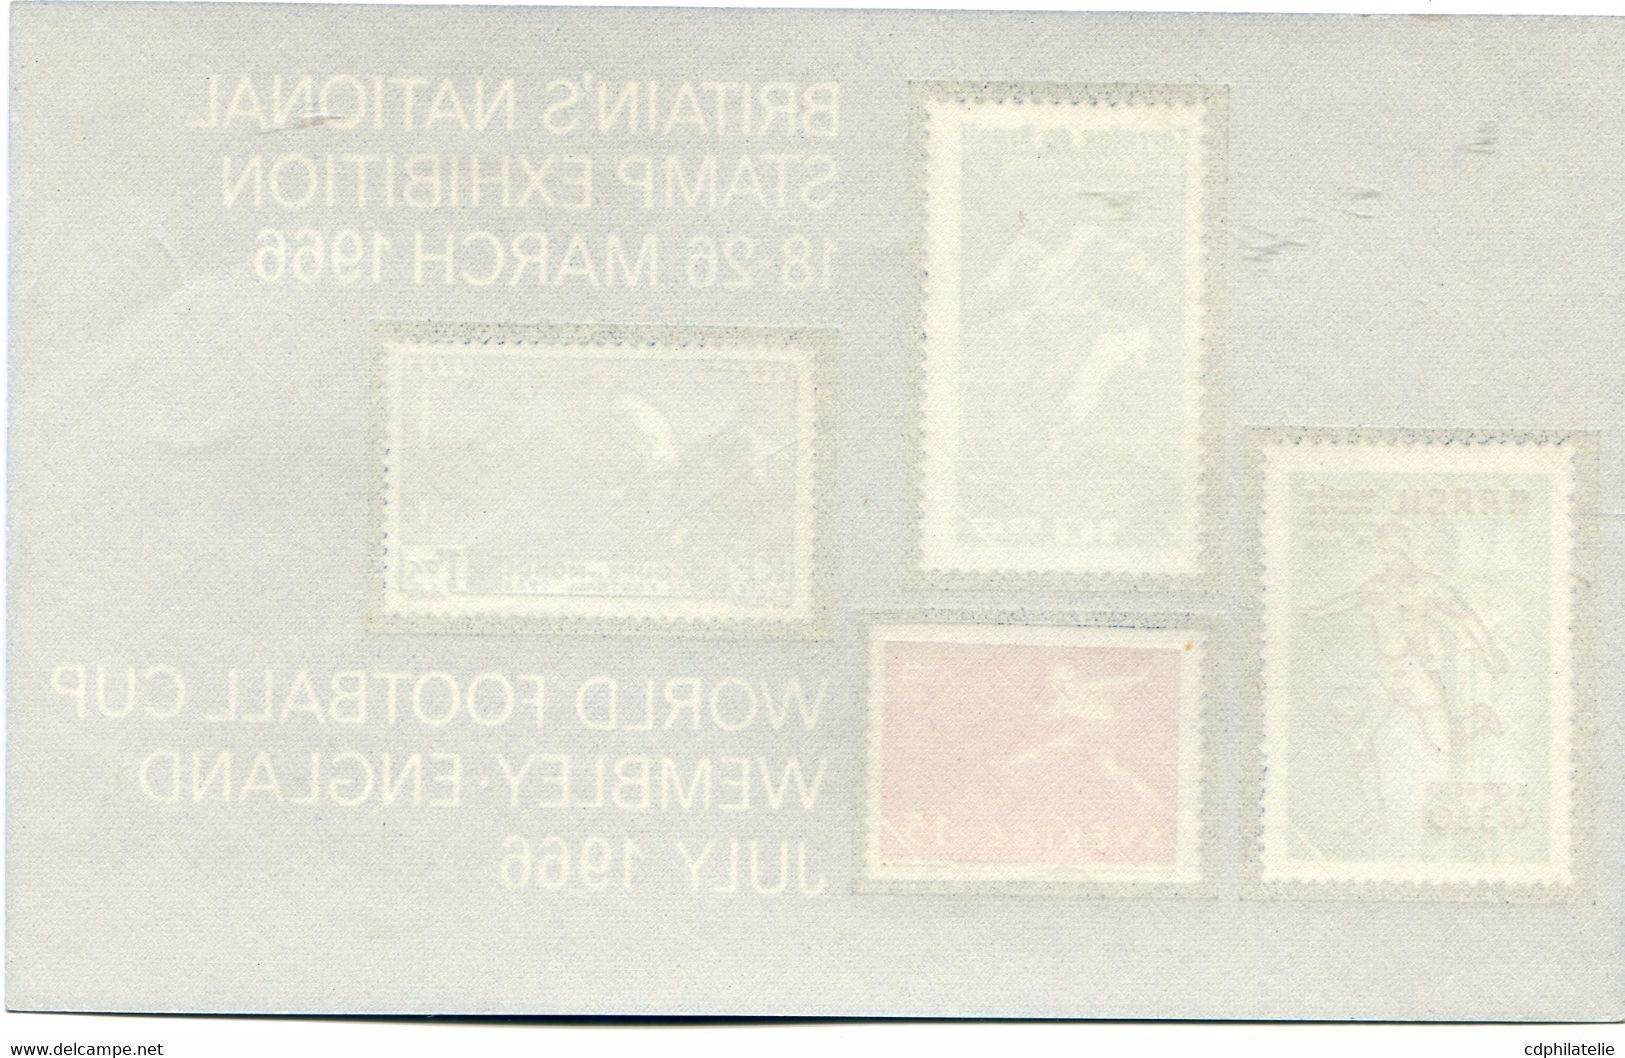 FEUILLET ** " BRITAIN'S NATIONAL STAMP EXHIBITION 18-26 MARCH 1966 WORLD FOOTBALL CUP WEMBLEY ENGLAND JULY 1966 " - 1966 – Engeland